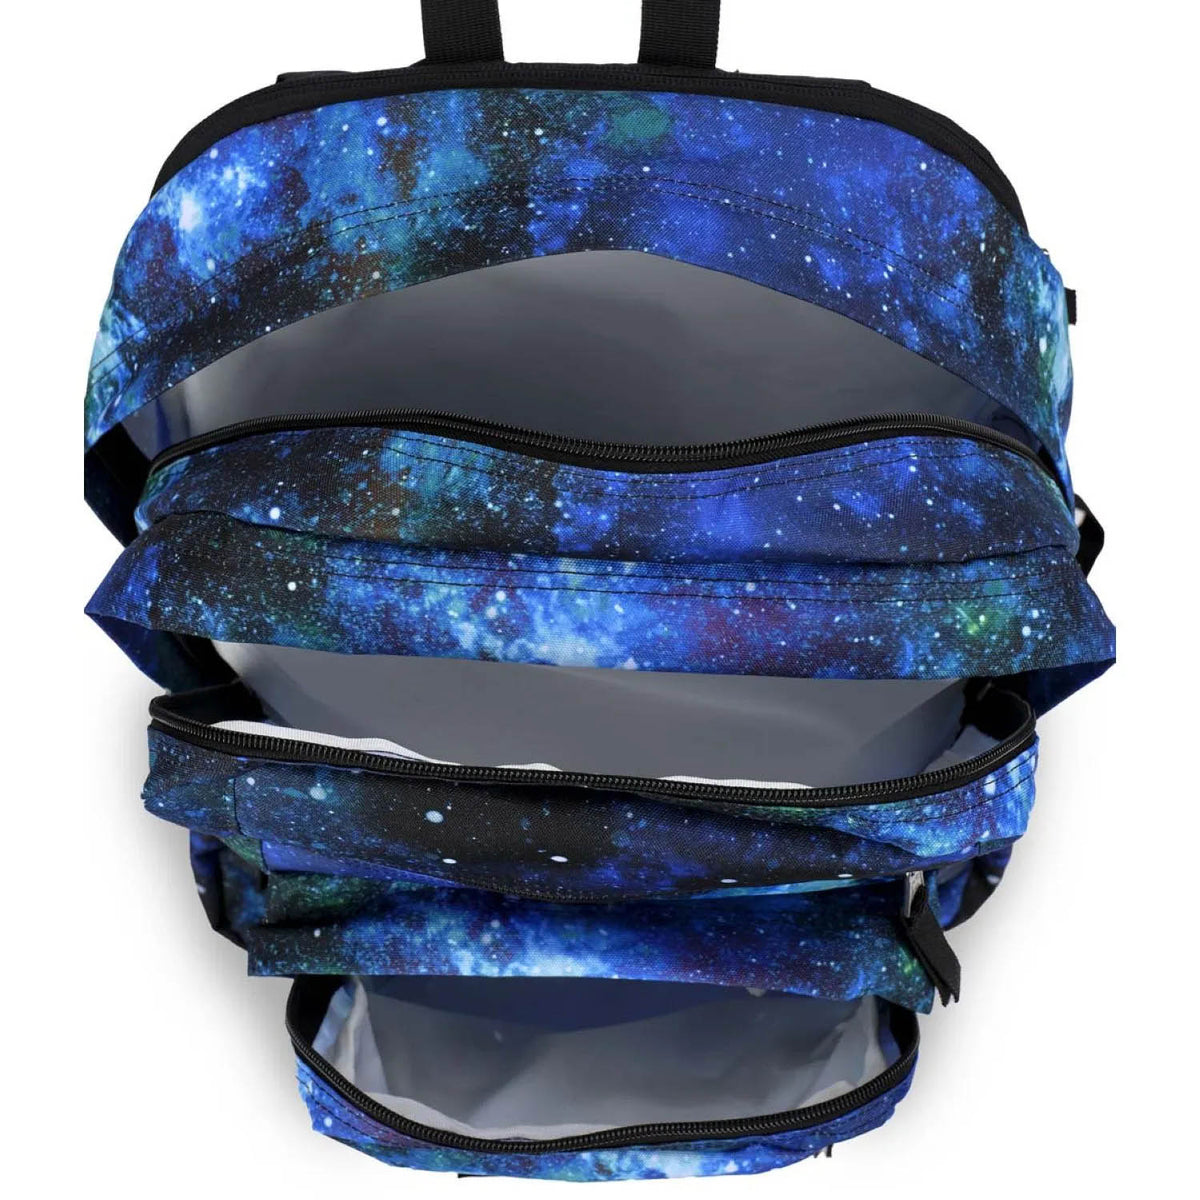 Jansport Big Student Backpack - Cyber Space Galaxy